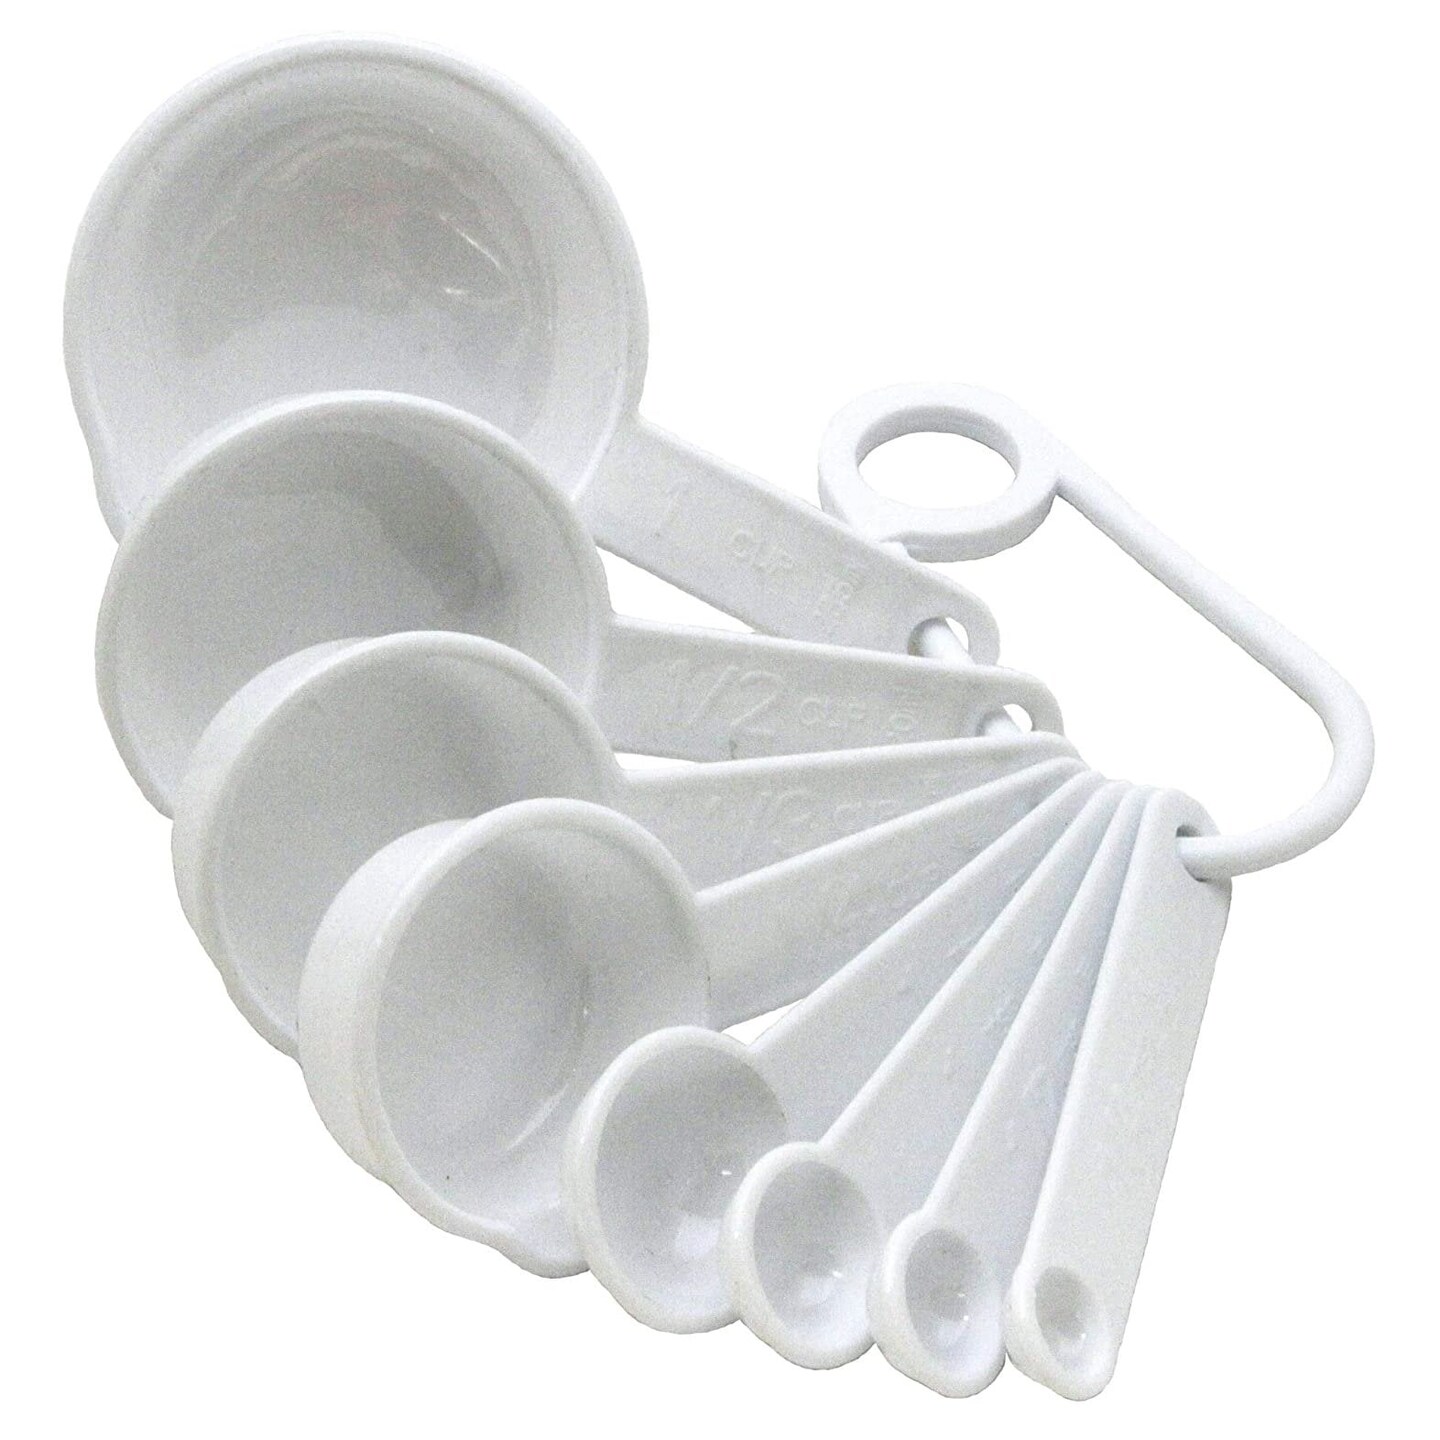 Chef Craft 8pc Plastic Measuring Cups & Spoons Set - 1/4 tsp, 1/2